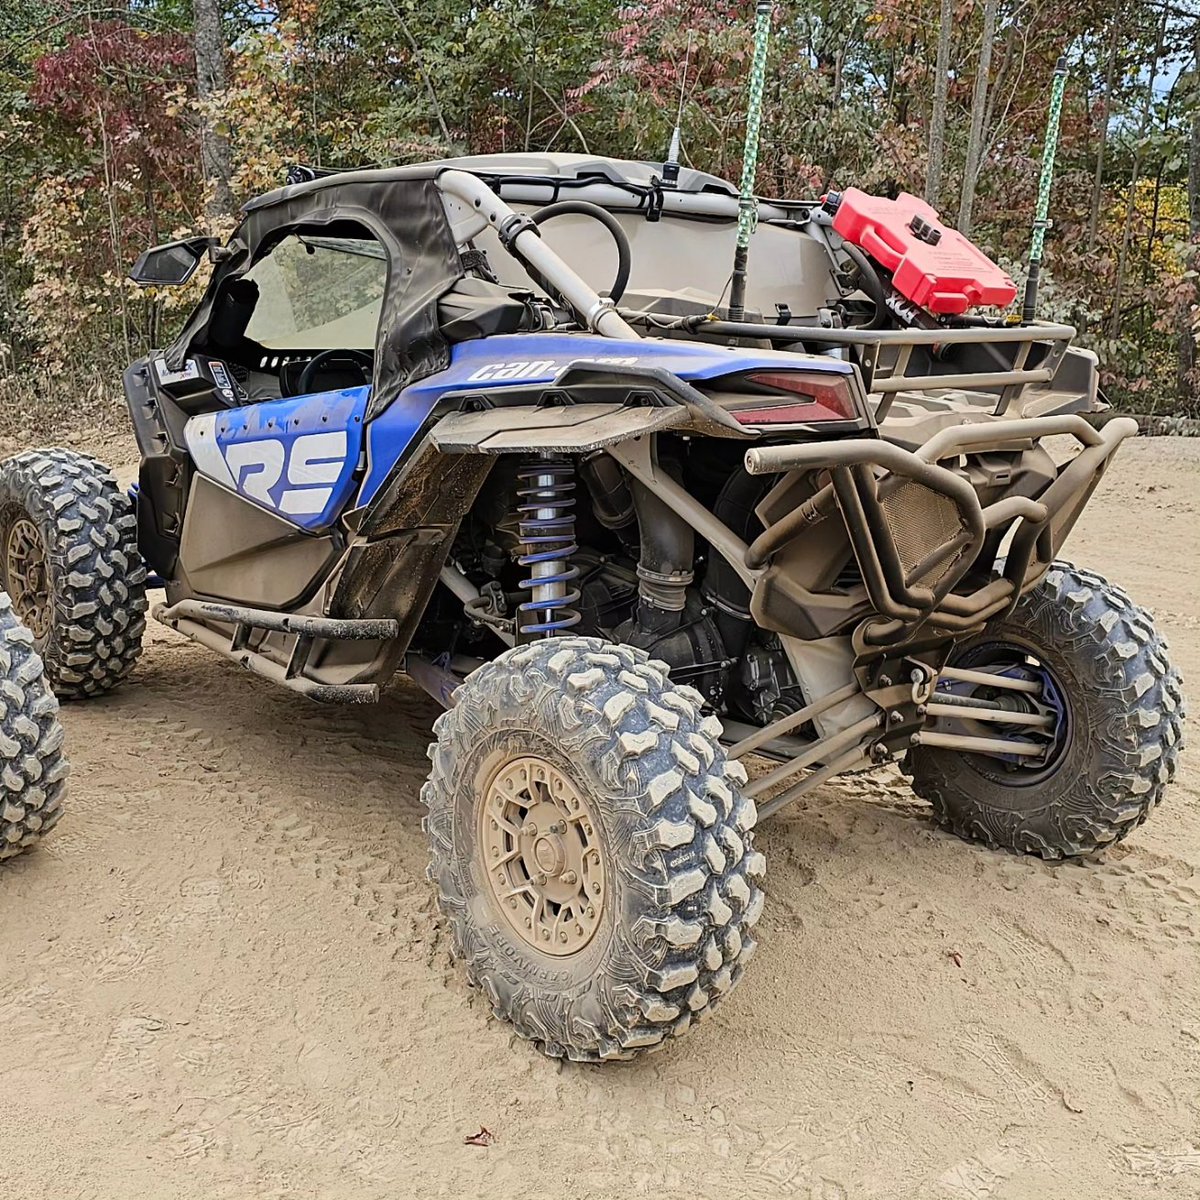 Never been more terrified in my life! Loved every minute! Thank you @ITACTURF for such a great trip. 👊#canam #canammaverickx3 #sxs #orv #hatfieldmccoytrails #hmt #trailsheaven #devilanse #rockhouse #braveheart #buffalomountain #gilbertwv #manwv #matewanwv #delbartonwv